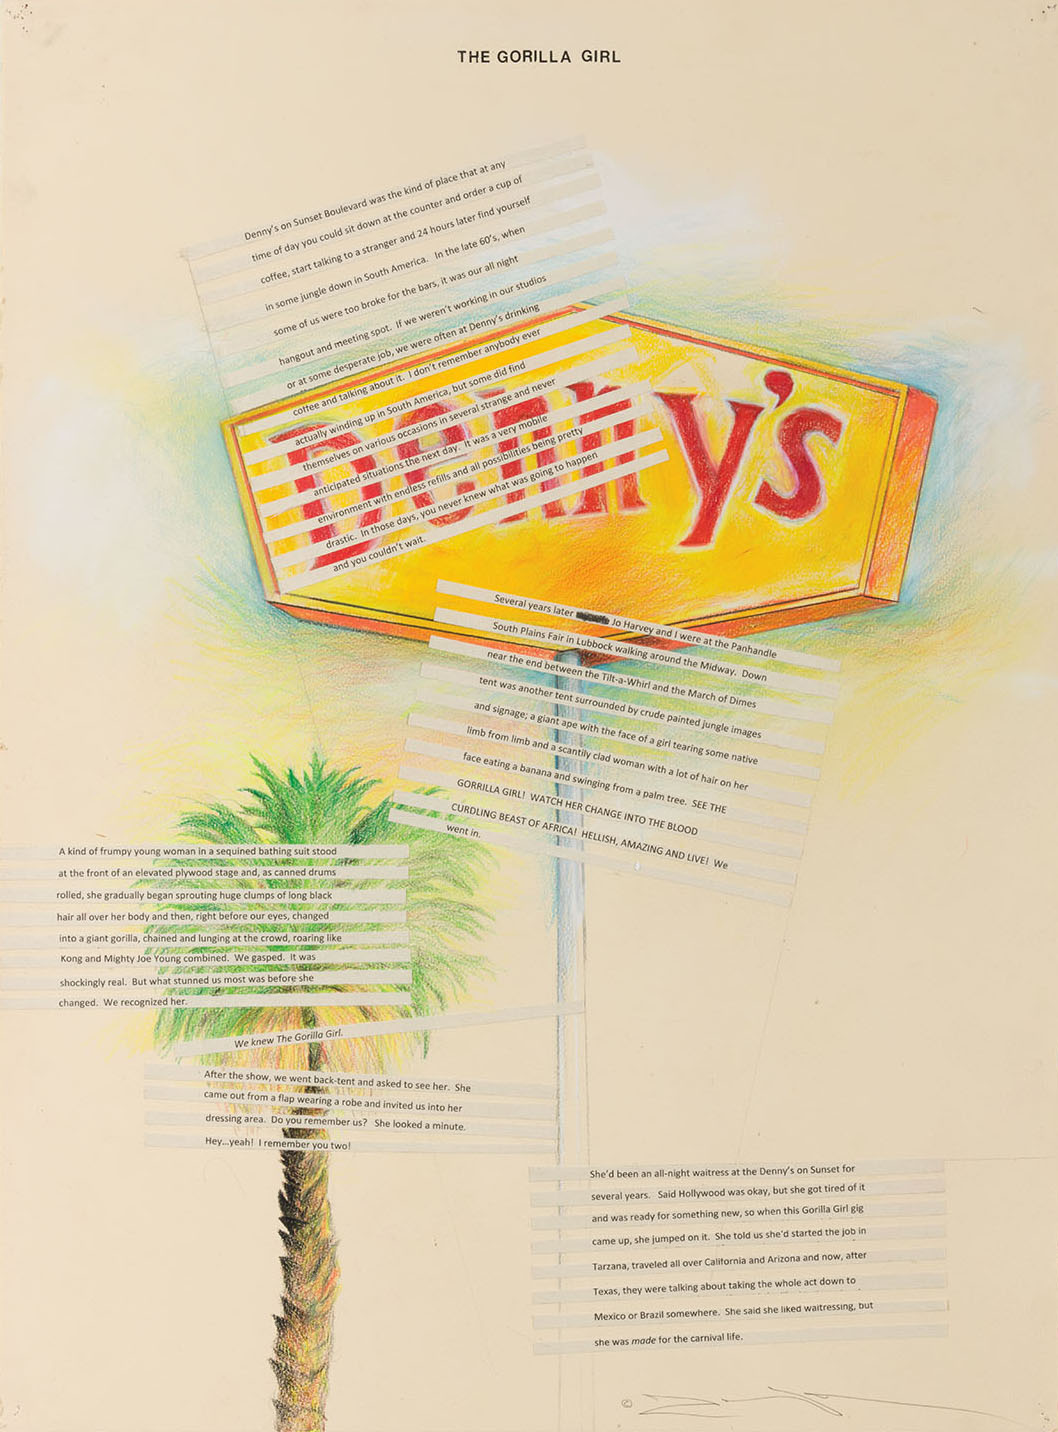 An artwork of a yellow Denny's sign with song lyrics cut up over the top